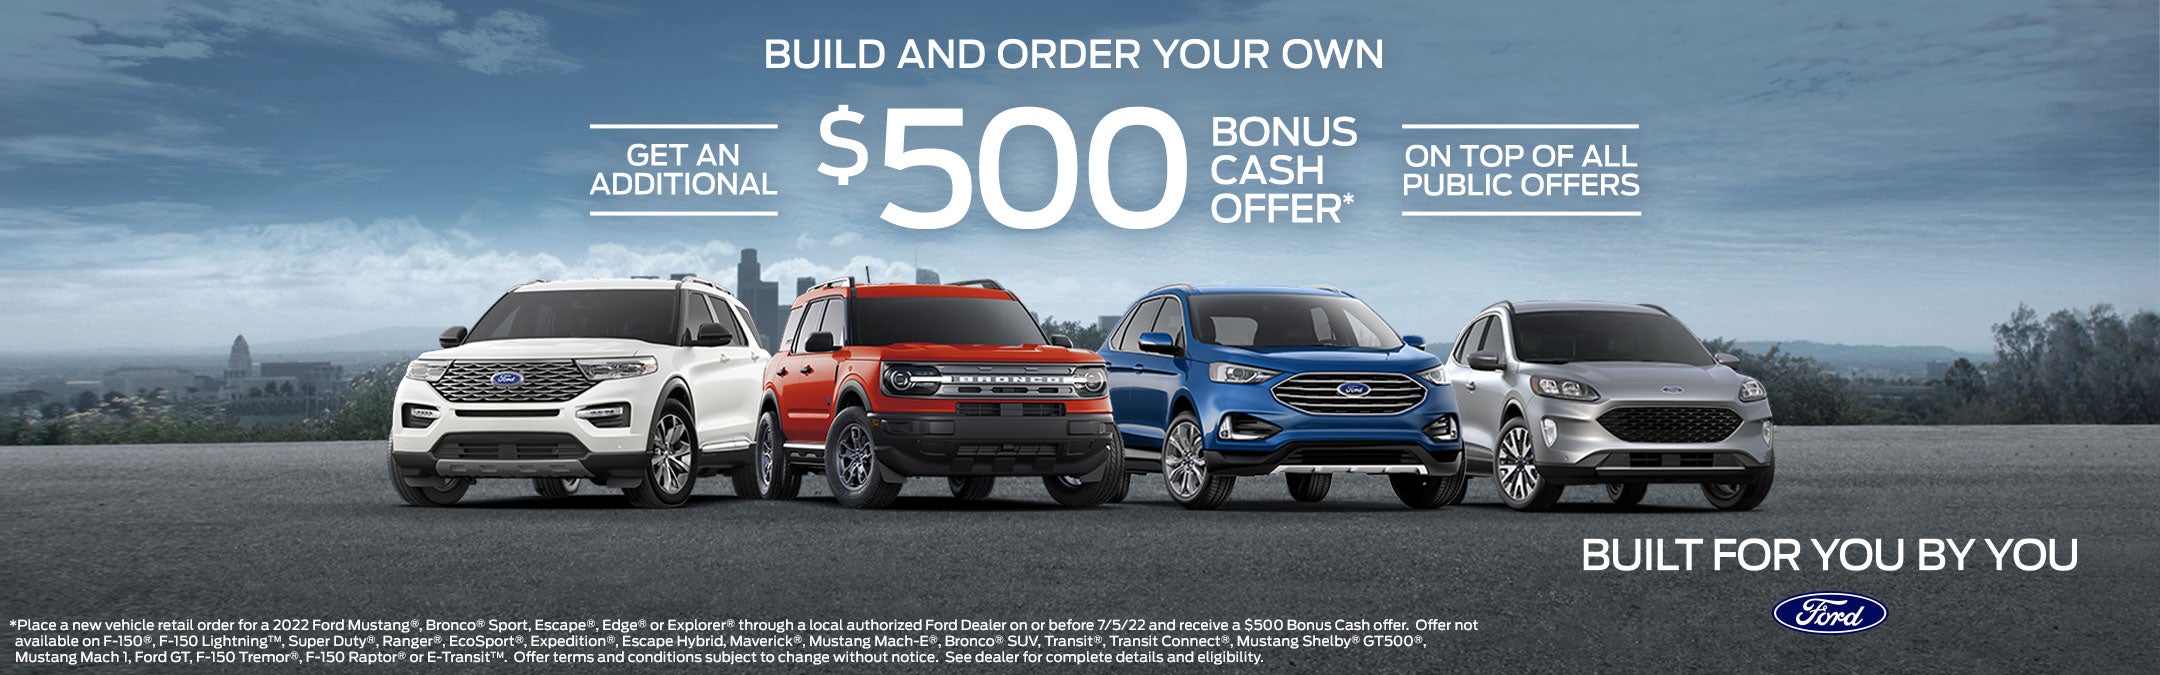 Build and Order Your Own Ford